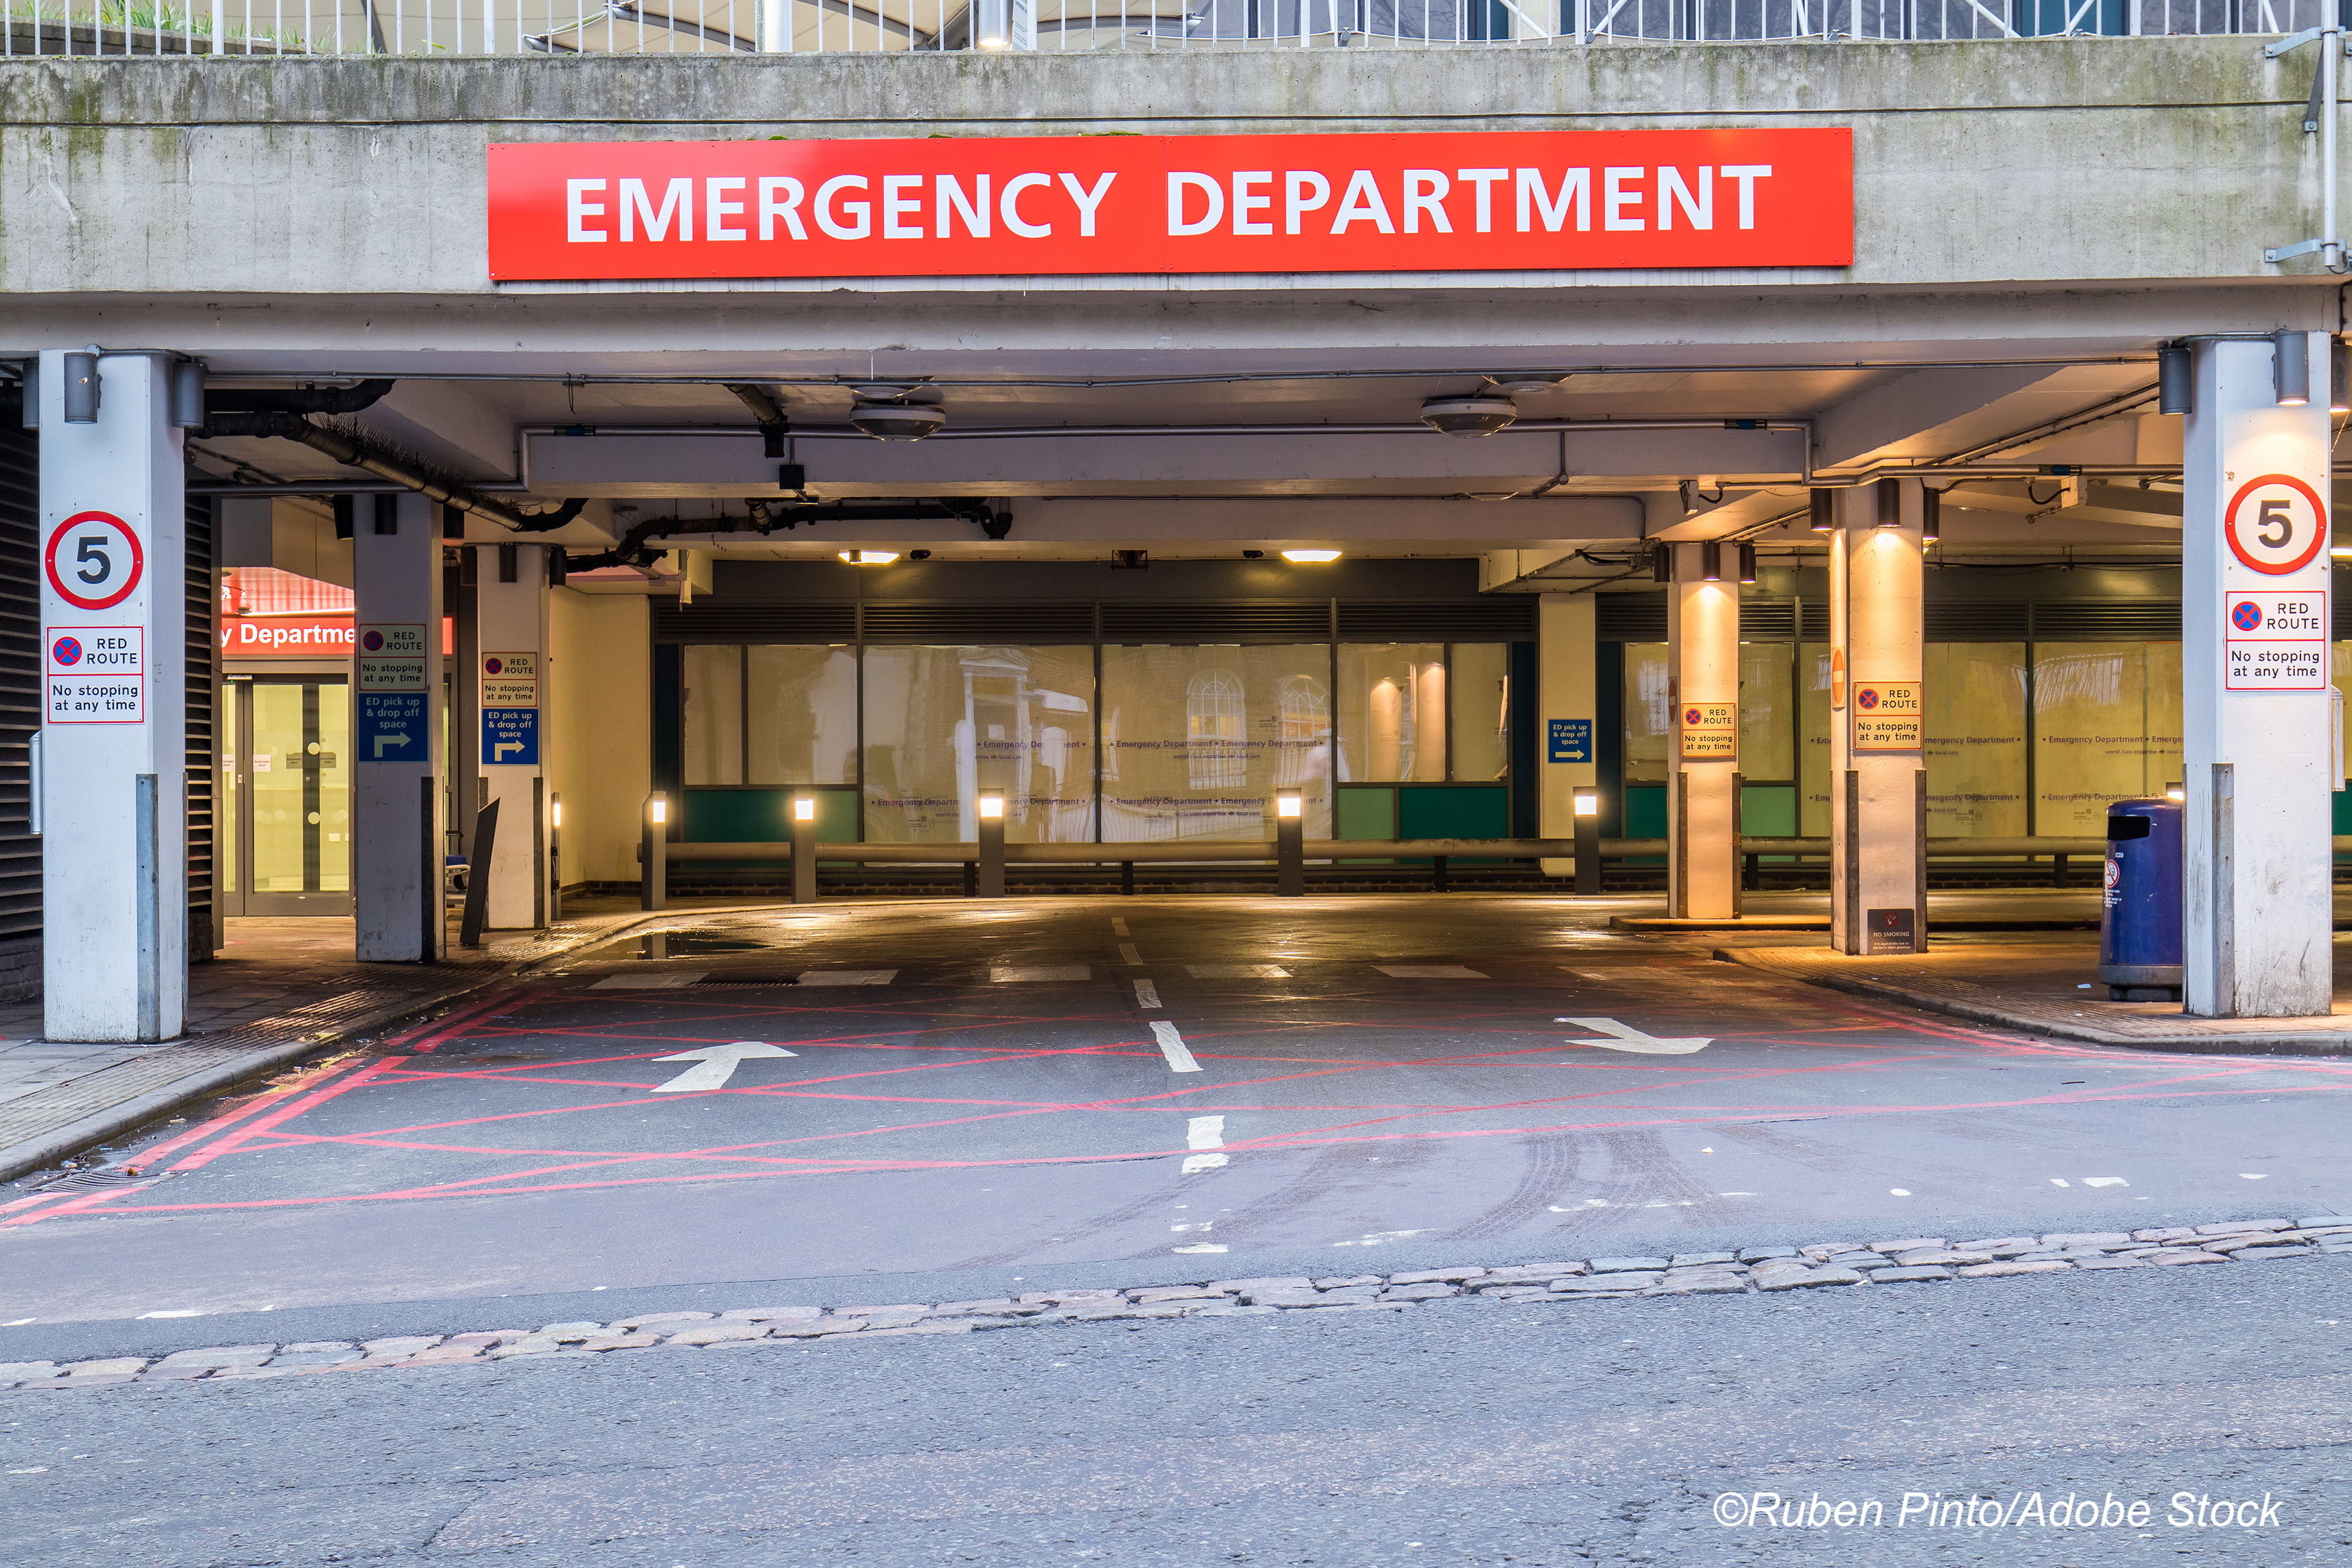 Covid-19: Vaccine Prevents Emergency Department, Urgent Care Need